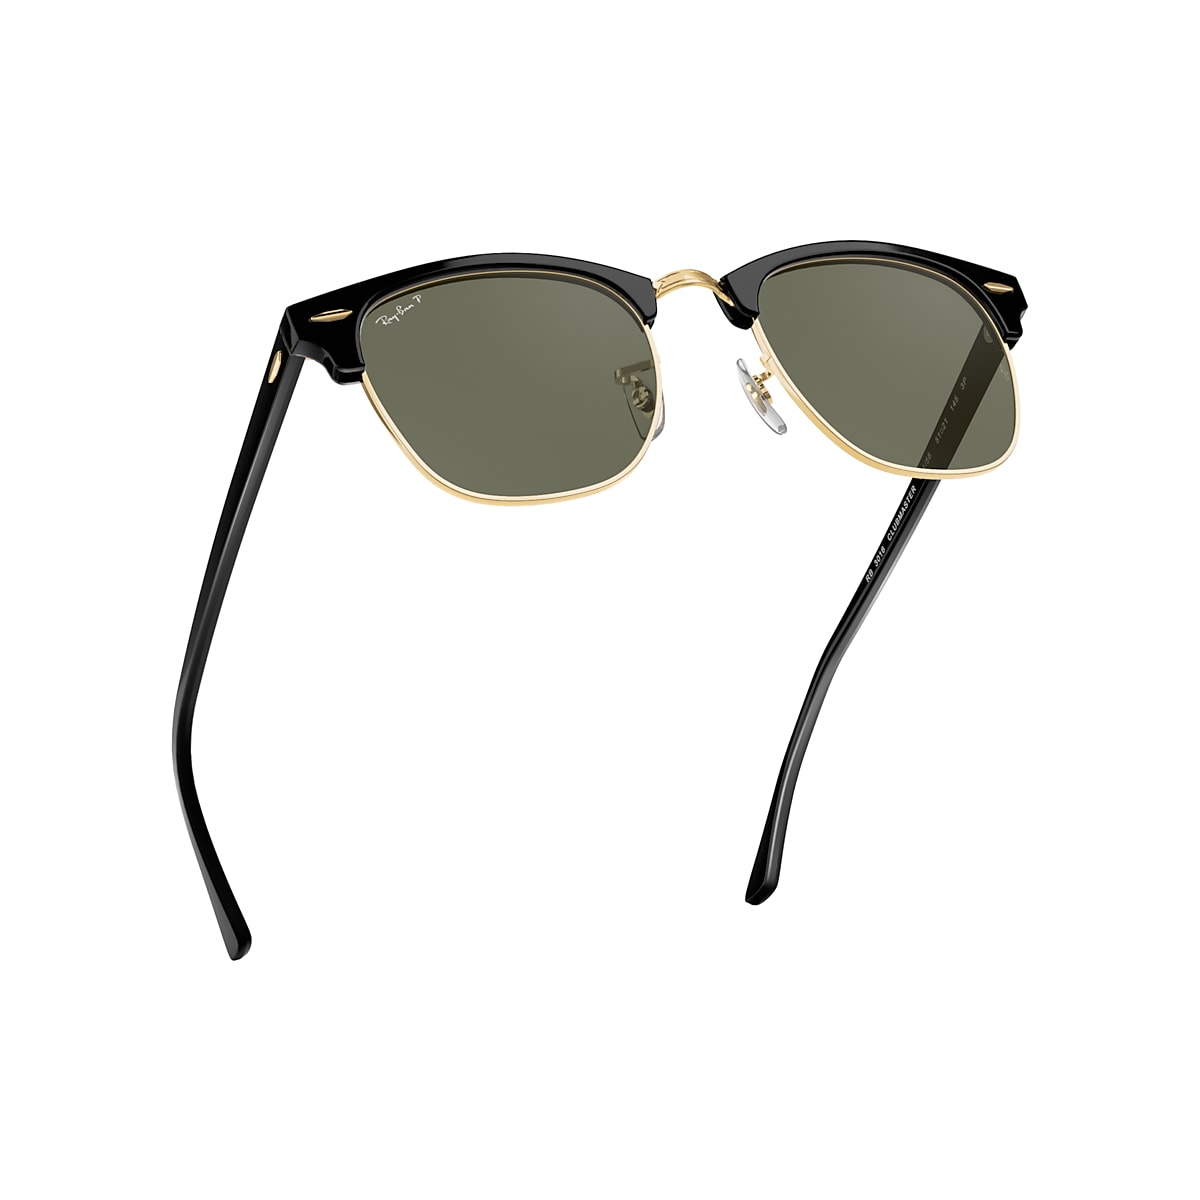 CLUBMASTER CLASSIC Sunglasses in Black and Green RB3016 | Ray-Ban®